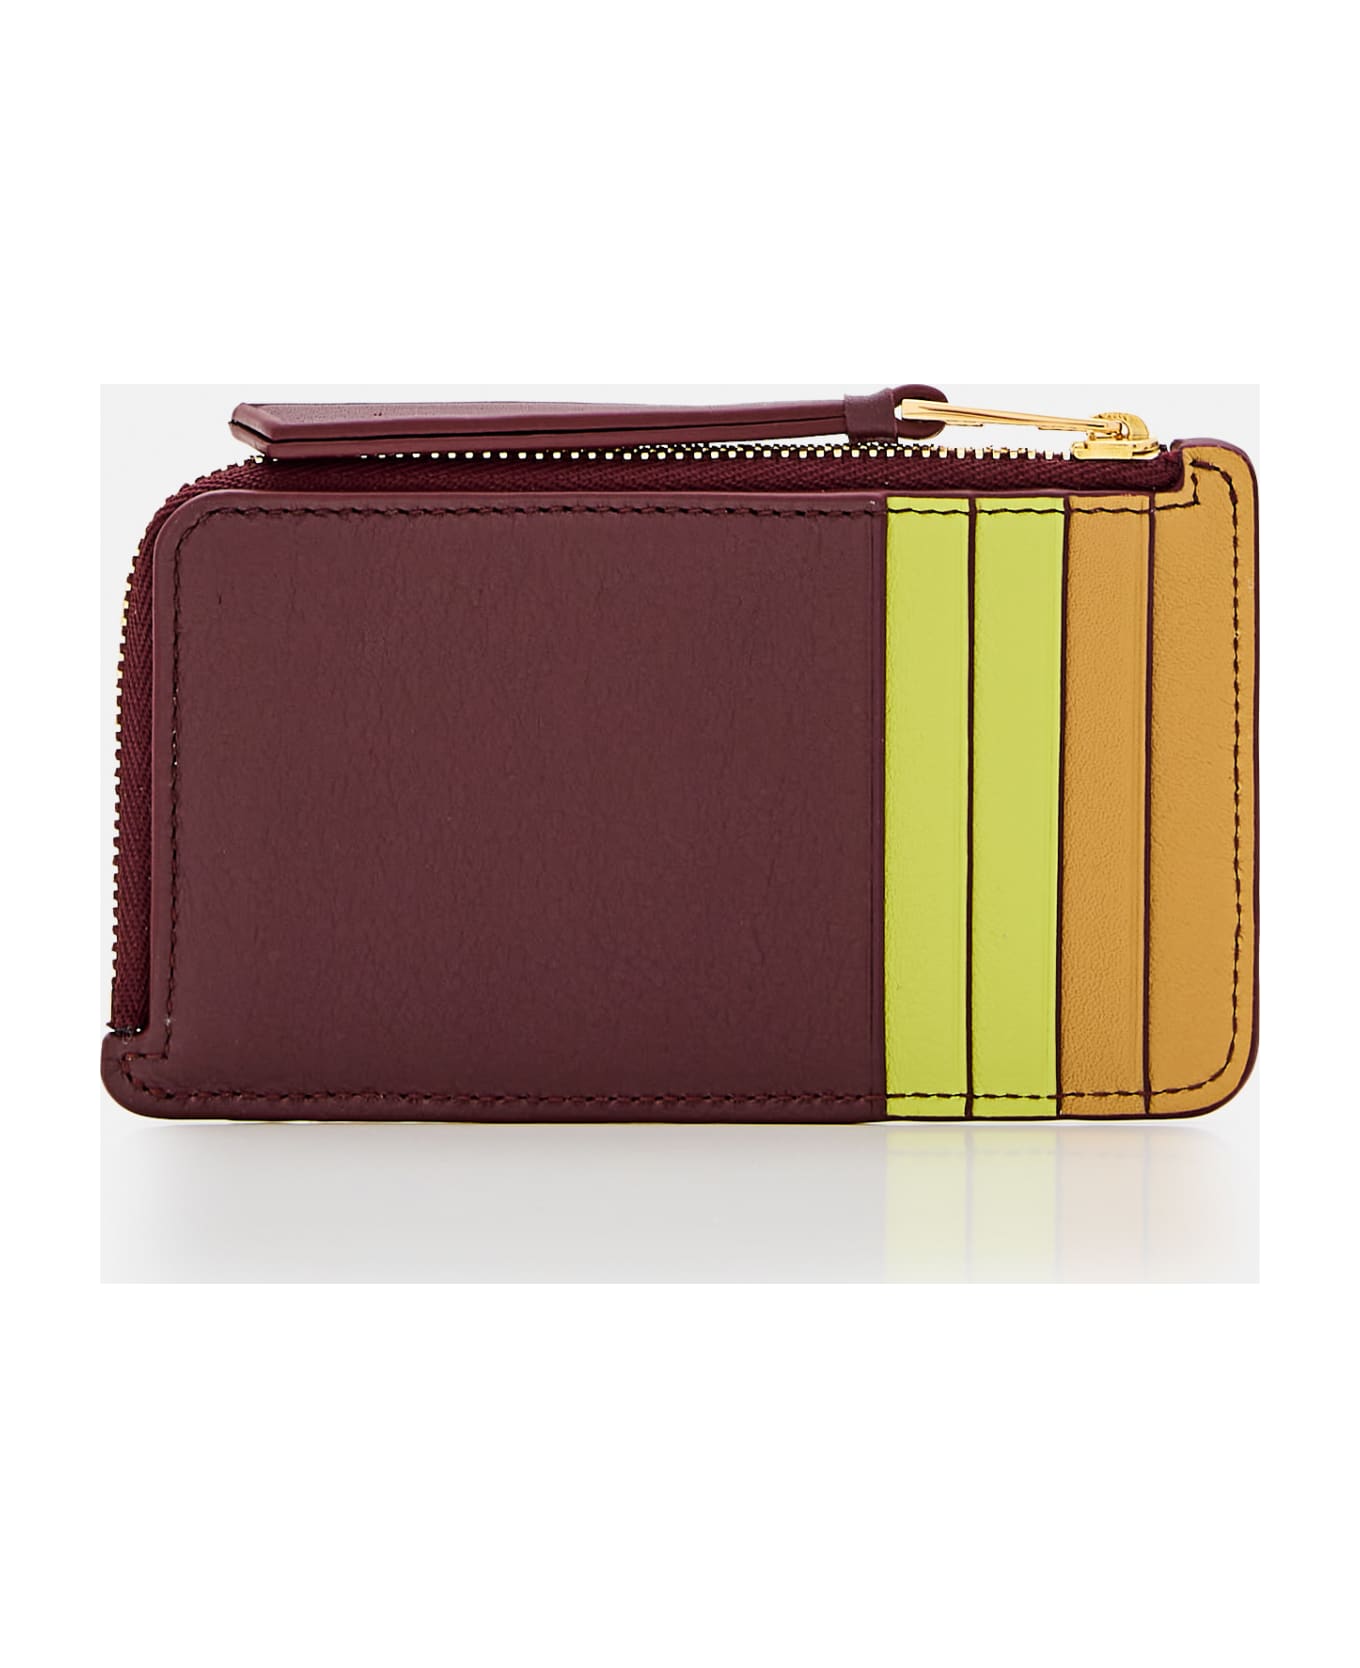 loewe almost Grey Coin Leather Cardholder - MultiColour